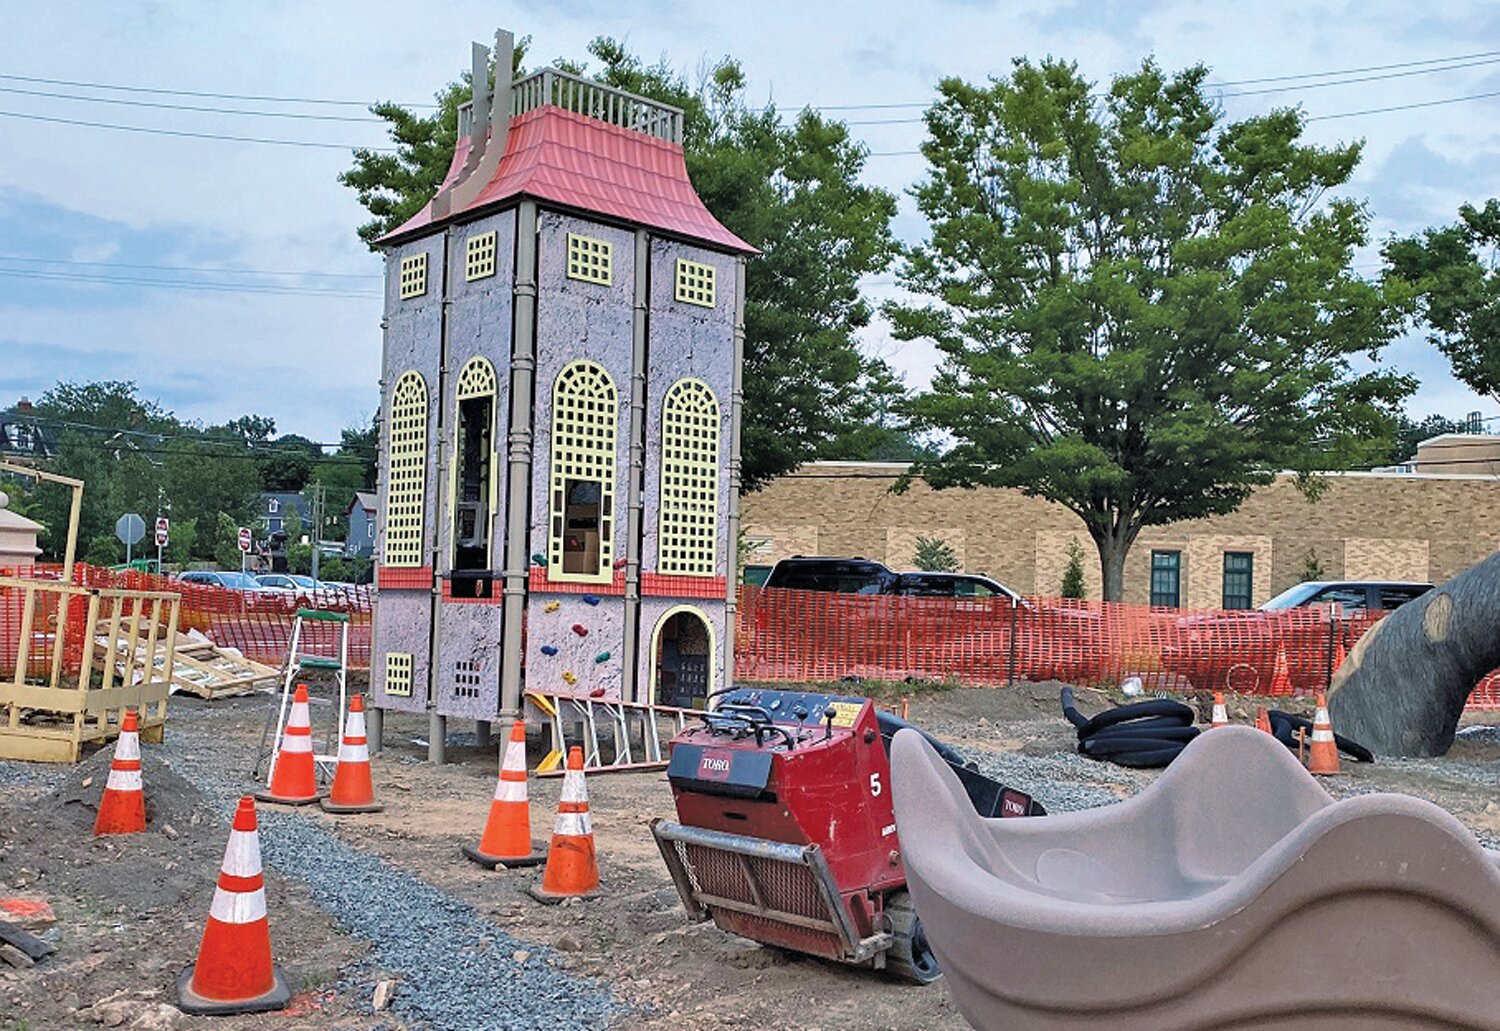 With Henry Mercer’s historic Fonthill Castle as its inspiration, a new playground at Doylestown's Broad Commons Park is being built.